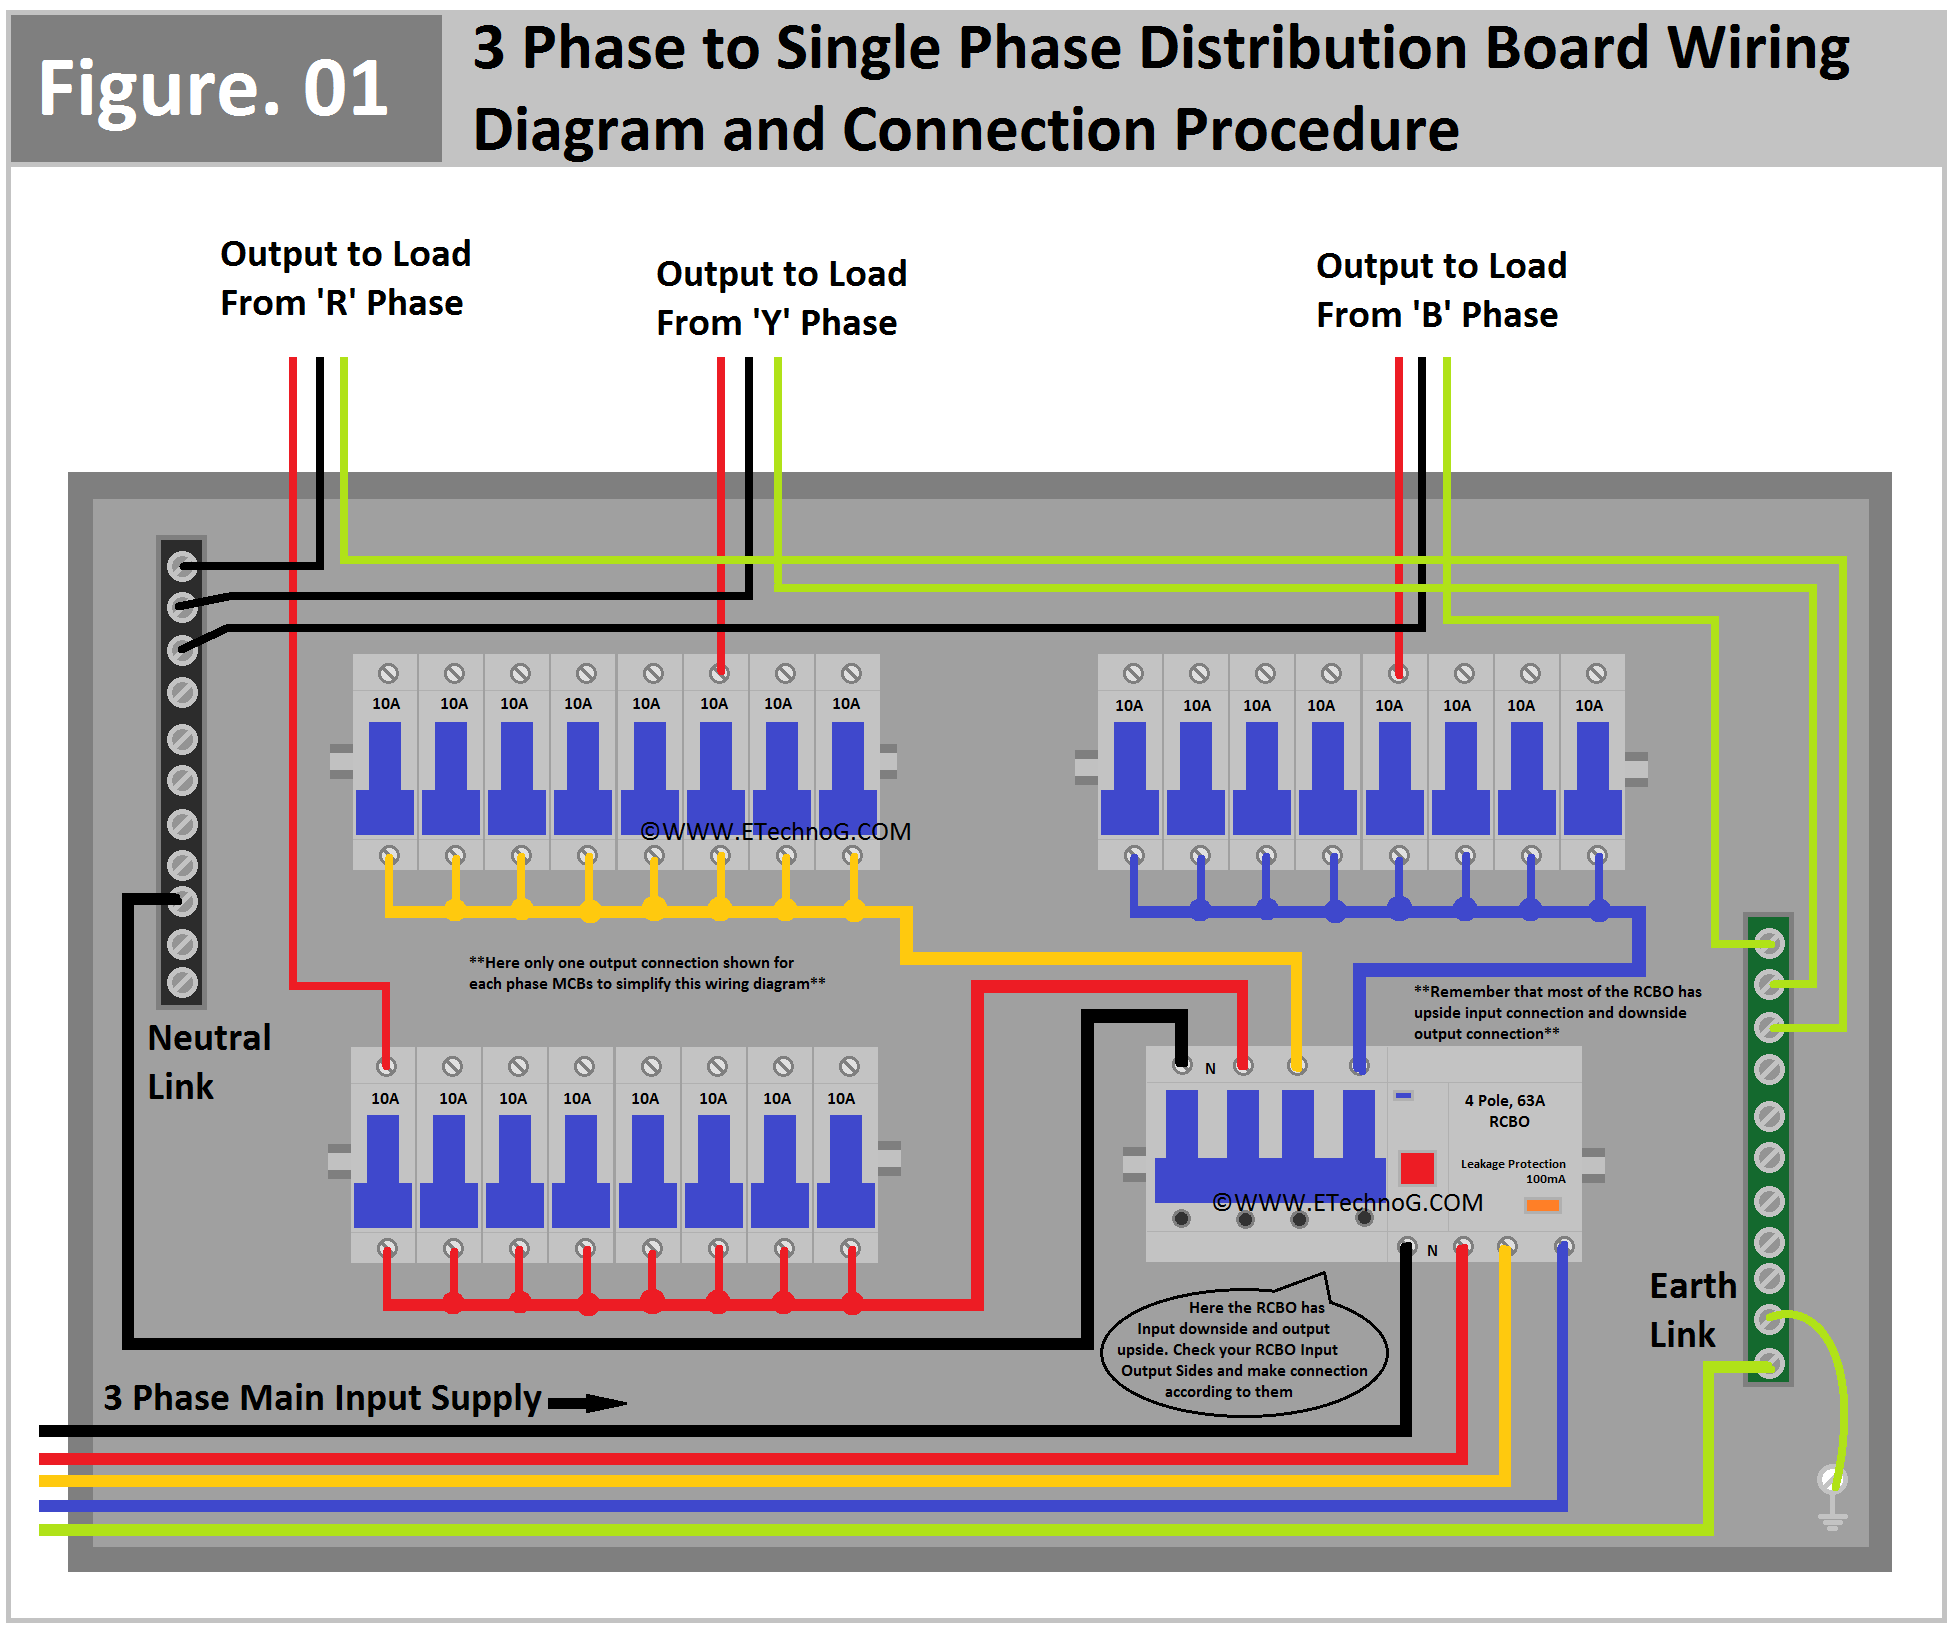 Three(3) Phase to Single Phase Distribution Board Wiring Diagram and Connection